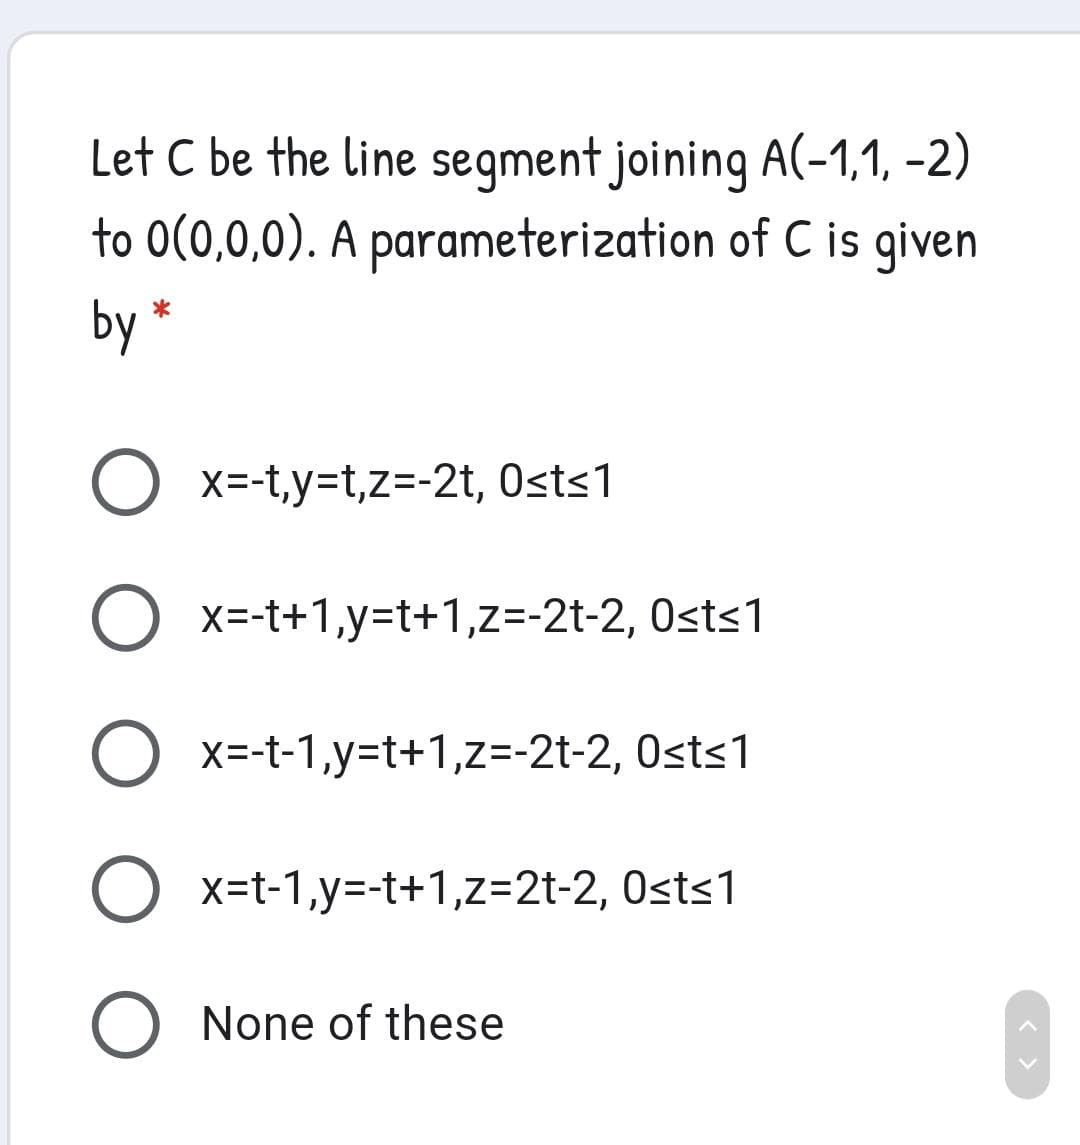 Let C be the line segment joining A(-1,1, -2)
to 0(0,0,0). A parameterization of C is given
by *
O x=-t,y=t,z=-2t, Osts1
O x=-t+1,y=t+1,z=-2t-2, Osts1
O x=-t-1,y=t+1,z=-2t-2, Osts1
x=t-1,y=-t+1,z=2t-2, Osts1
None of these
